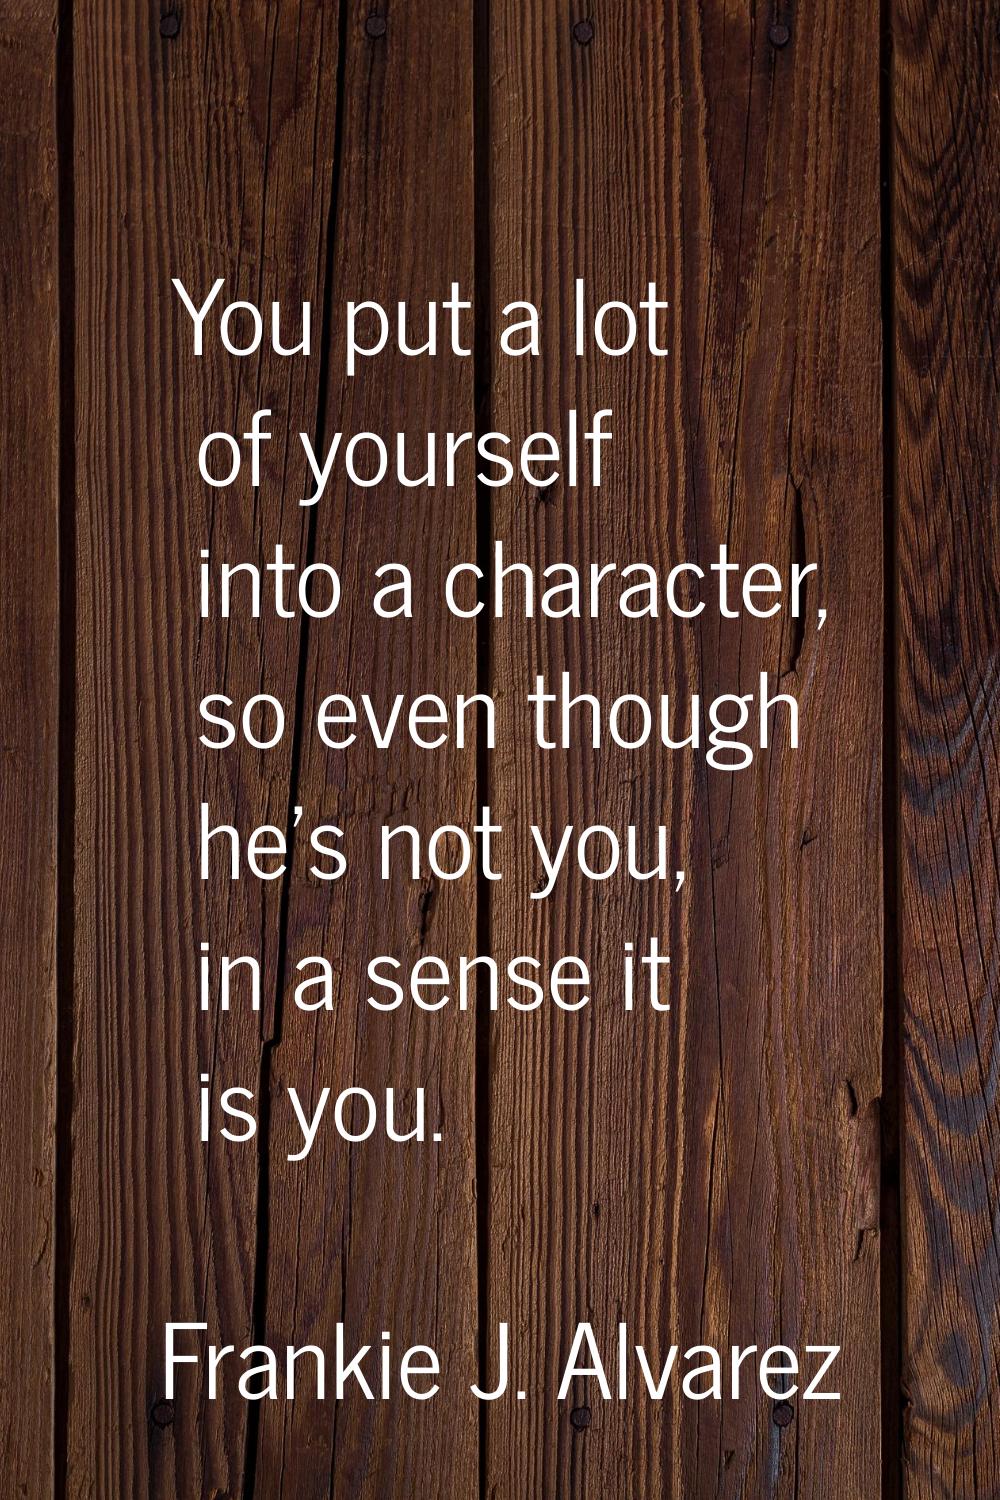 You put a lot of yourself into a character, so even though he's not you, in a sense it is you.